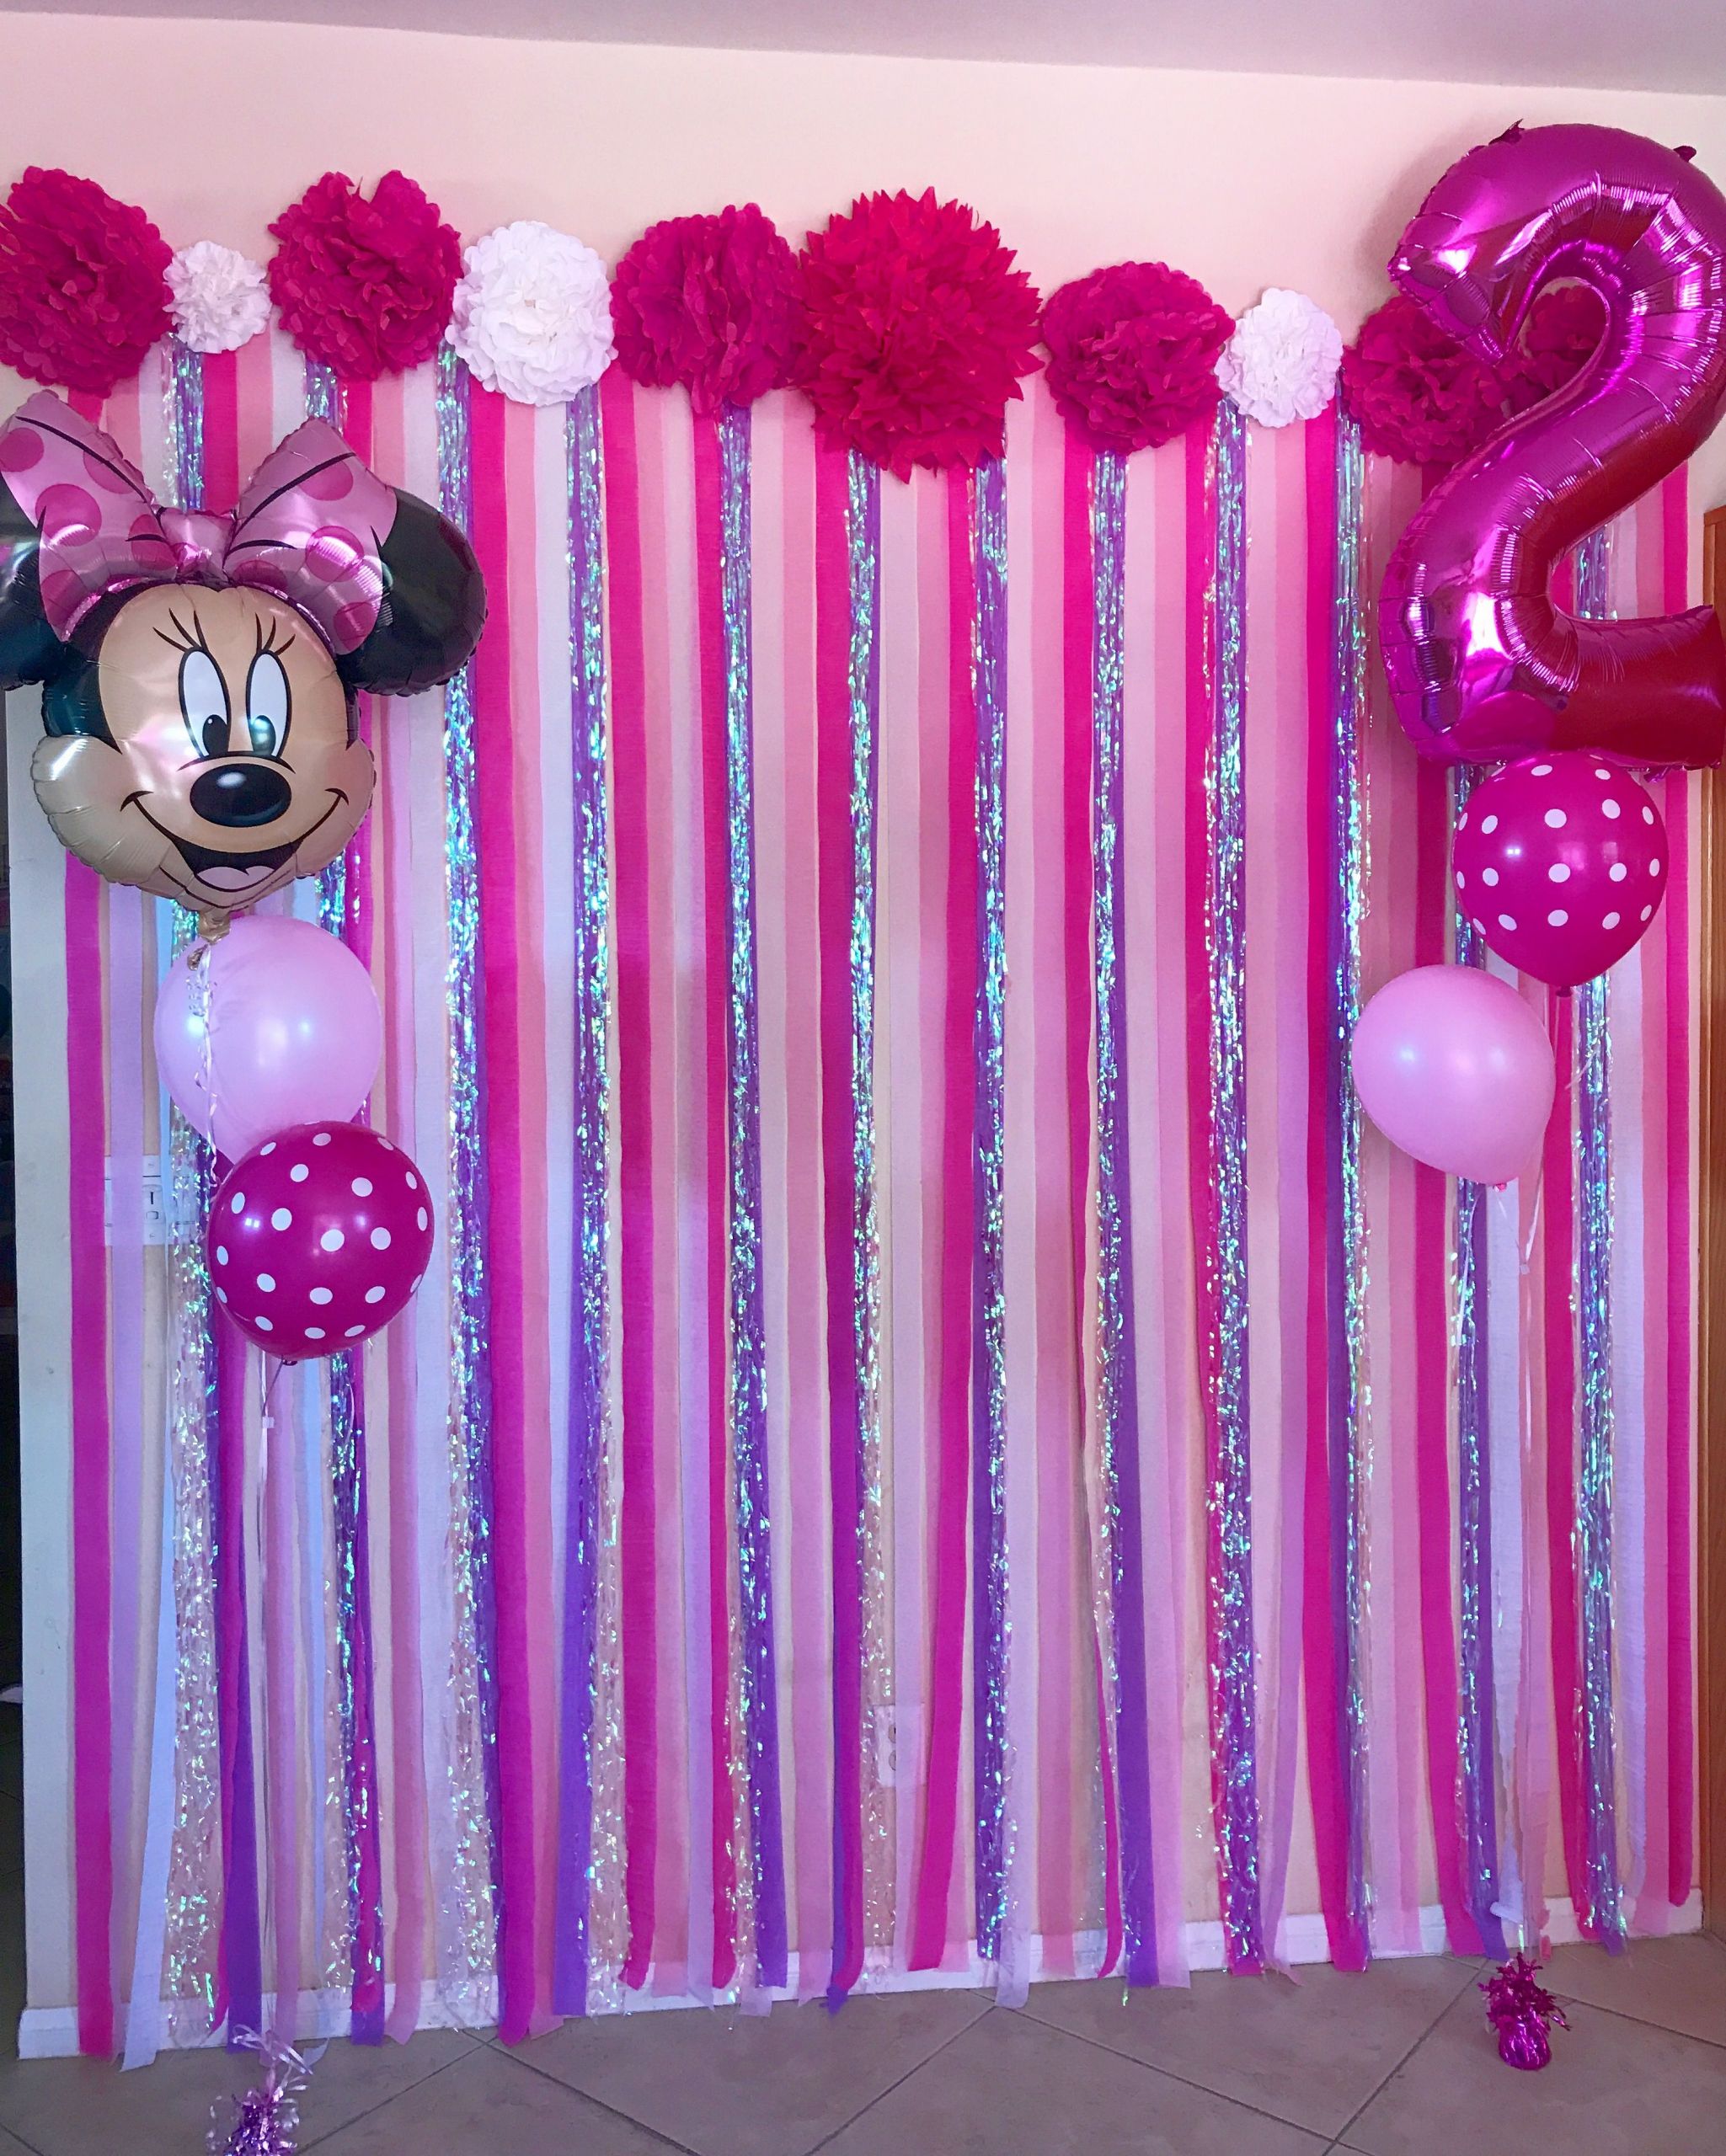 DIY Minnie Mouse Party Decorations
 DIY Minnie Mouse themed photo streamer wall in 2019